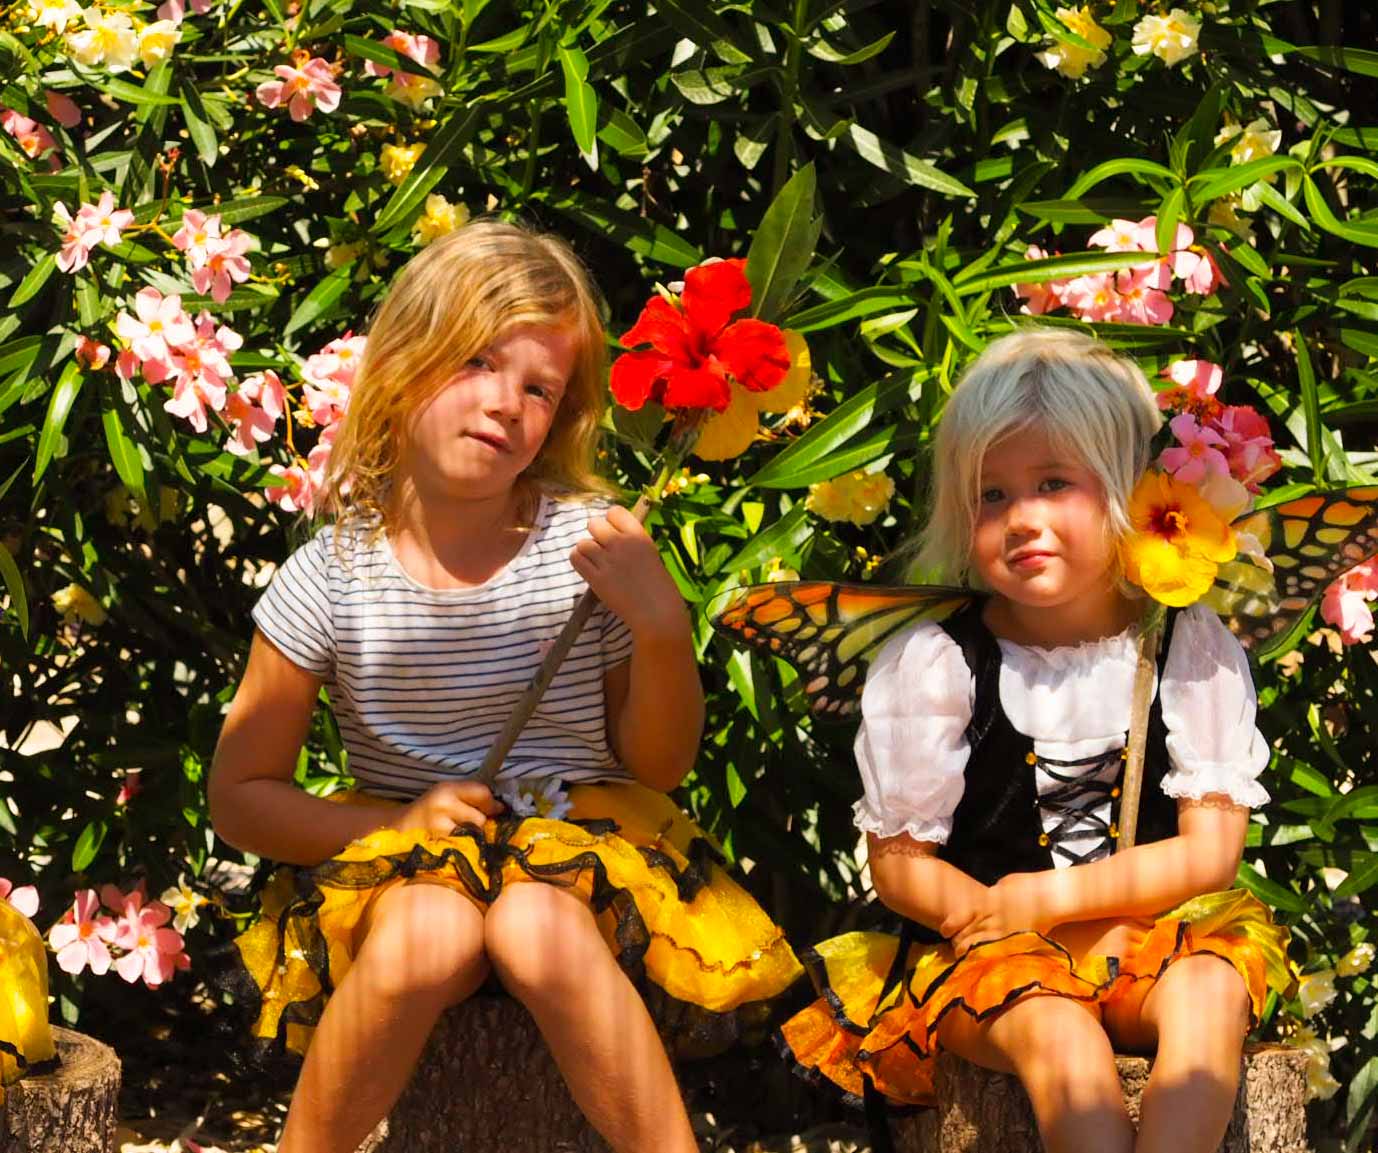 2 girls dressed in bee and butterfly costumes holding handmade wands made from sticks and flowers